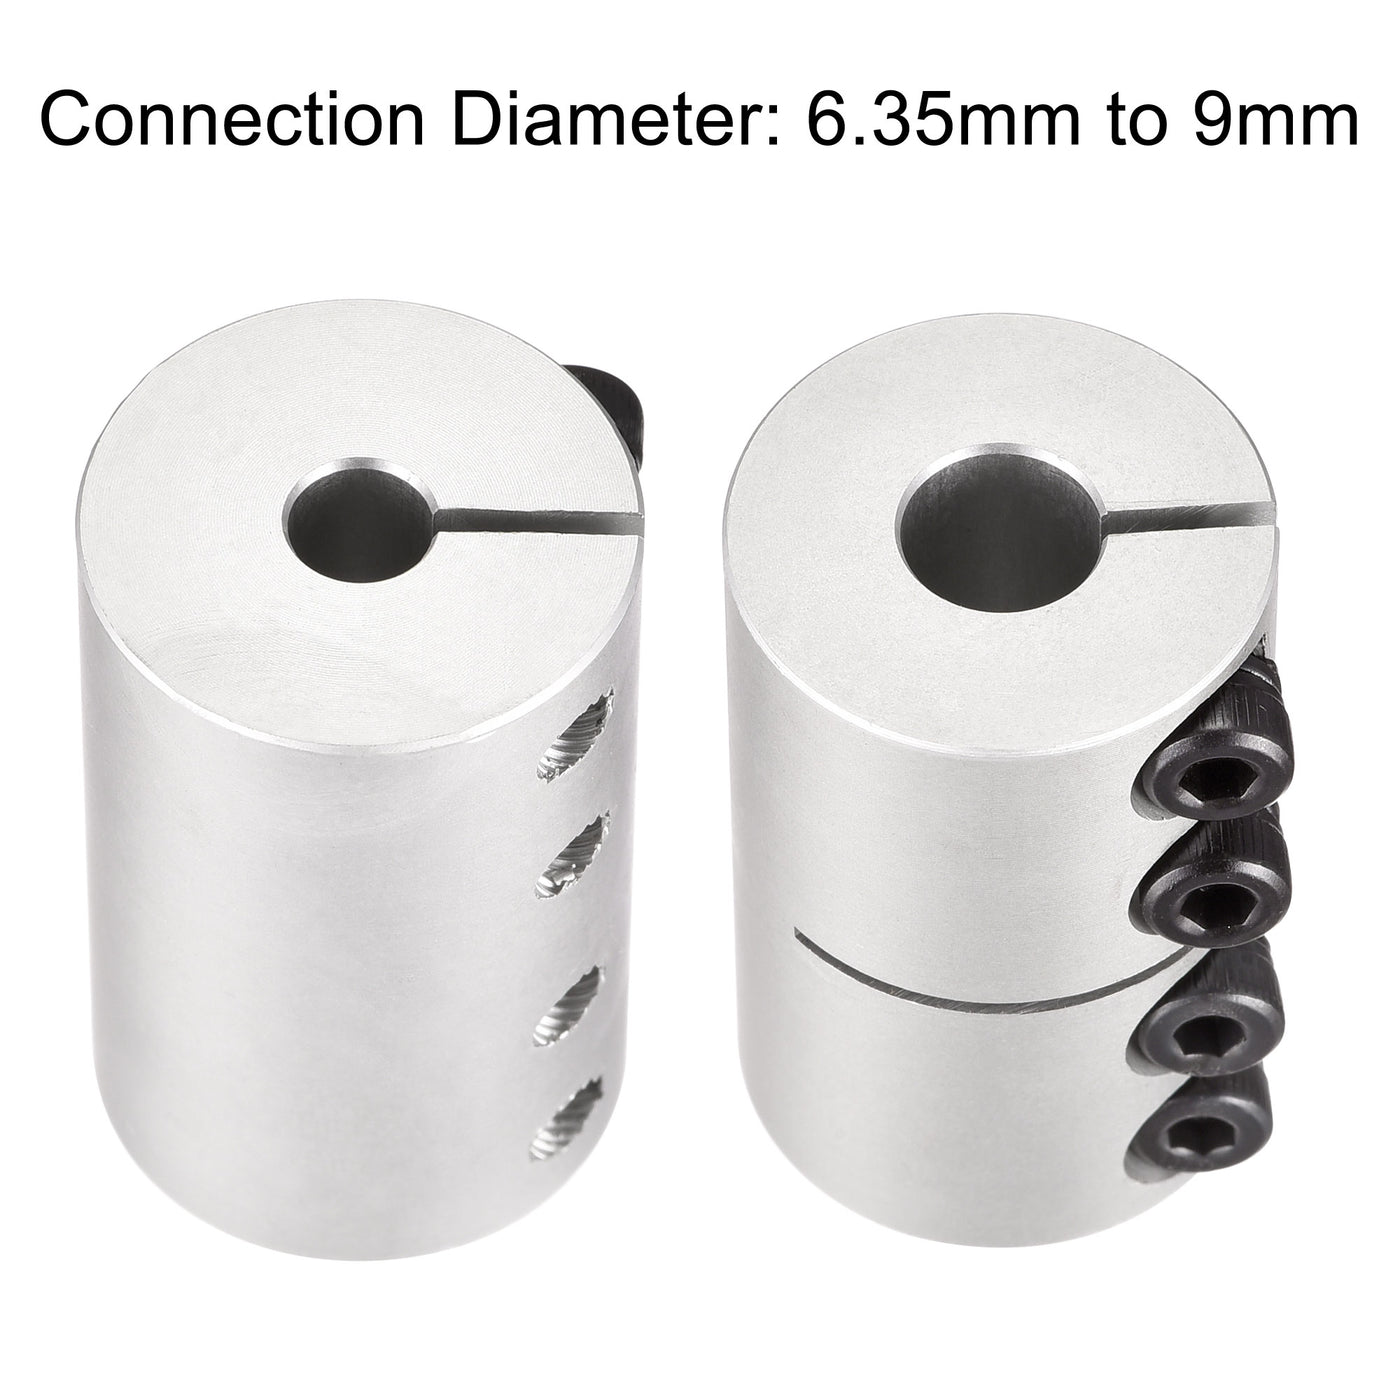 Uxcell Uxcell 2pcs 7mm to 8mm Shaft Coupling 25mmx40mm Coupler Aluminum Alloy Joint Motor for 3D Printer CNC Machine DIY Encoder